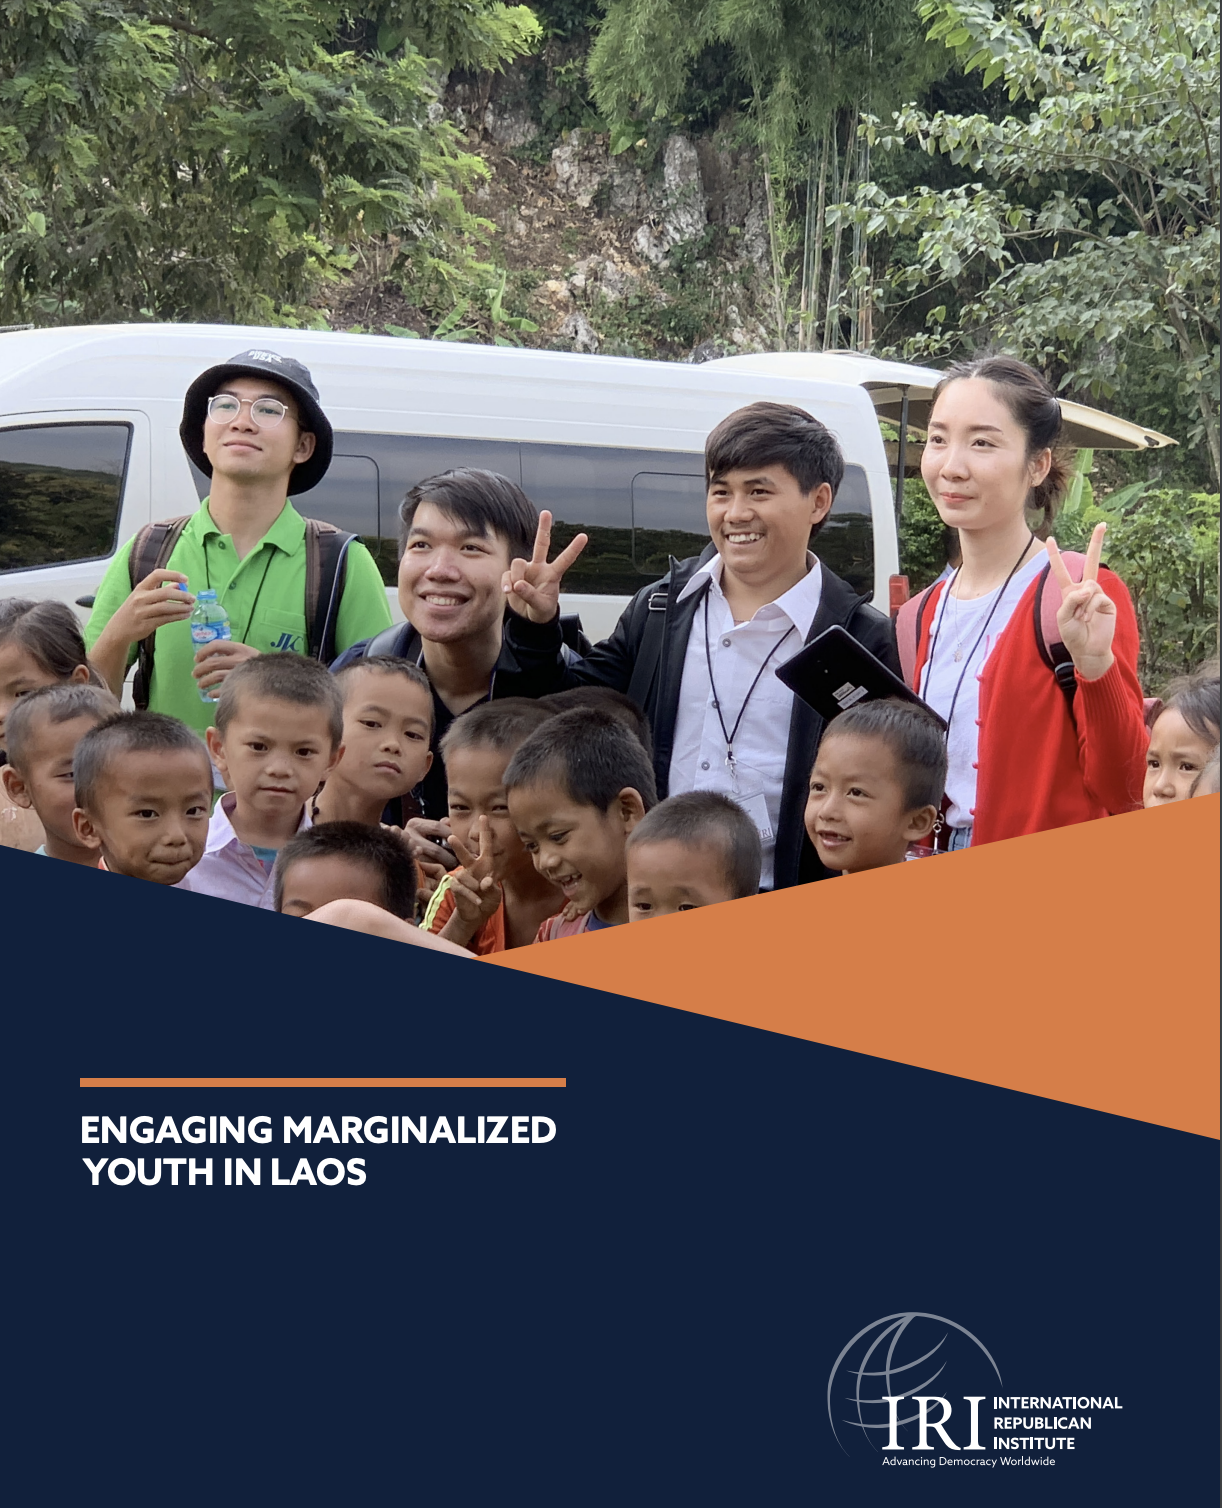 ENGAGING MARGINALIZED YOUTH IN LAOS